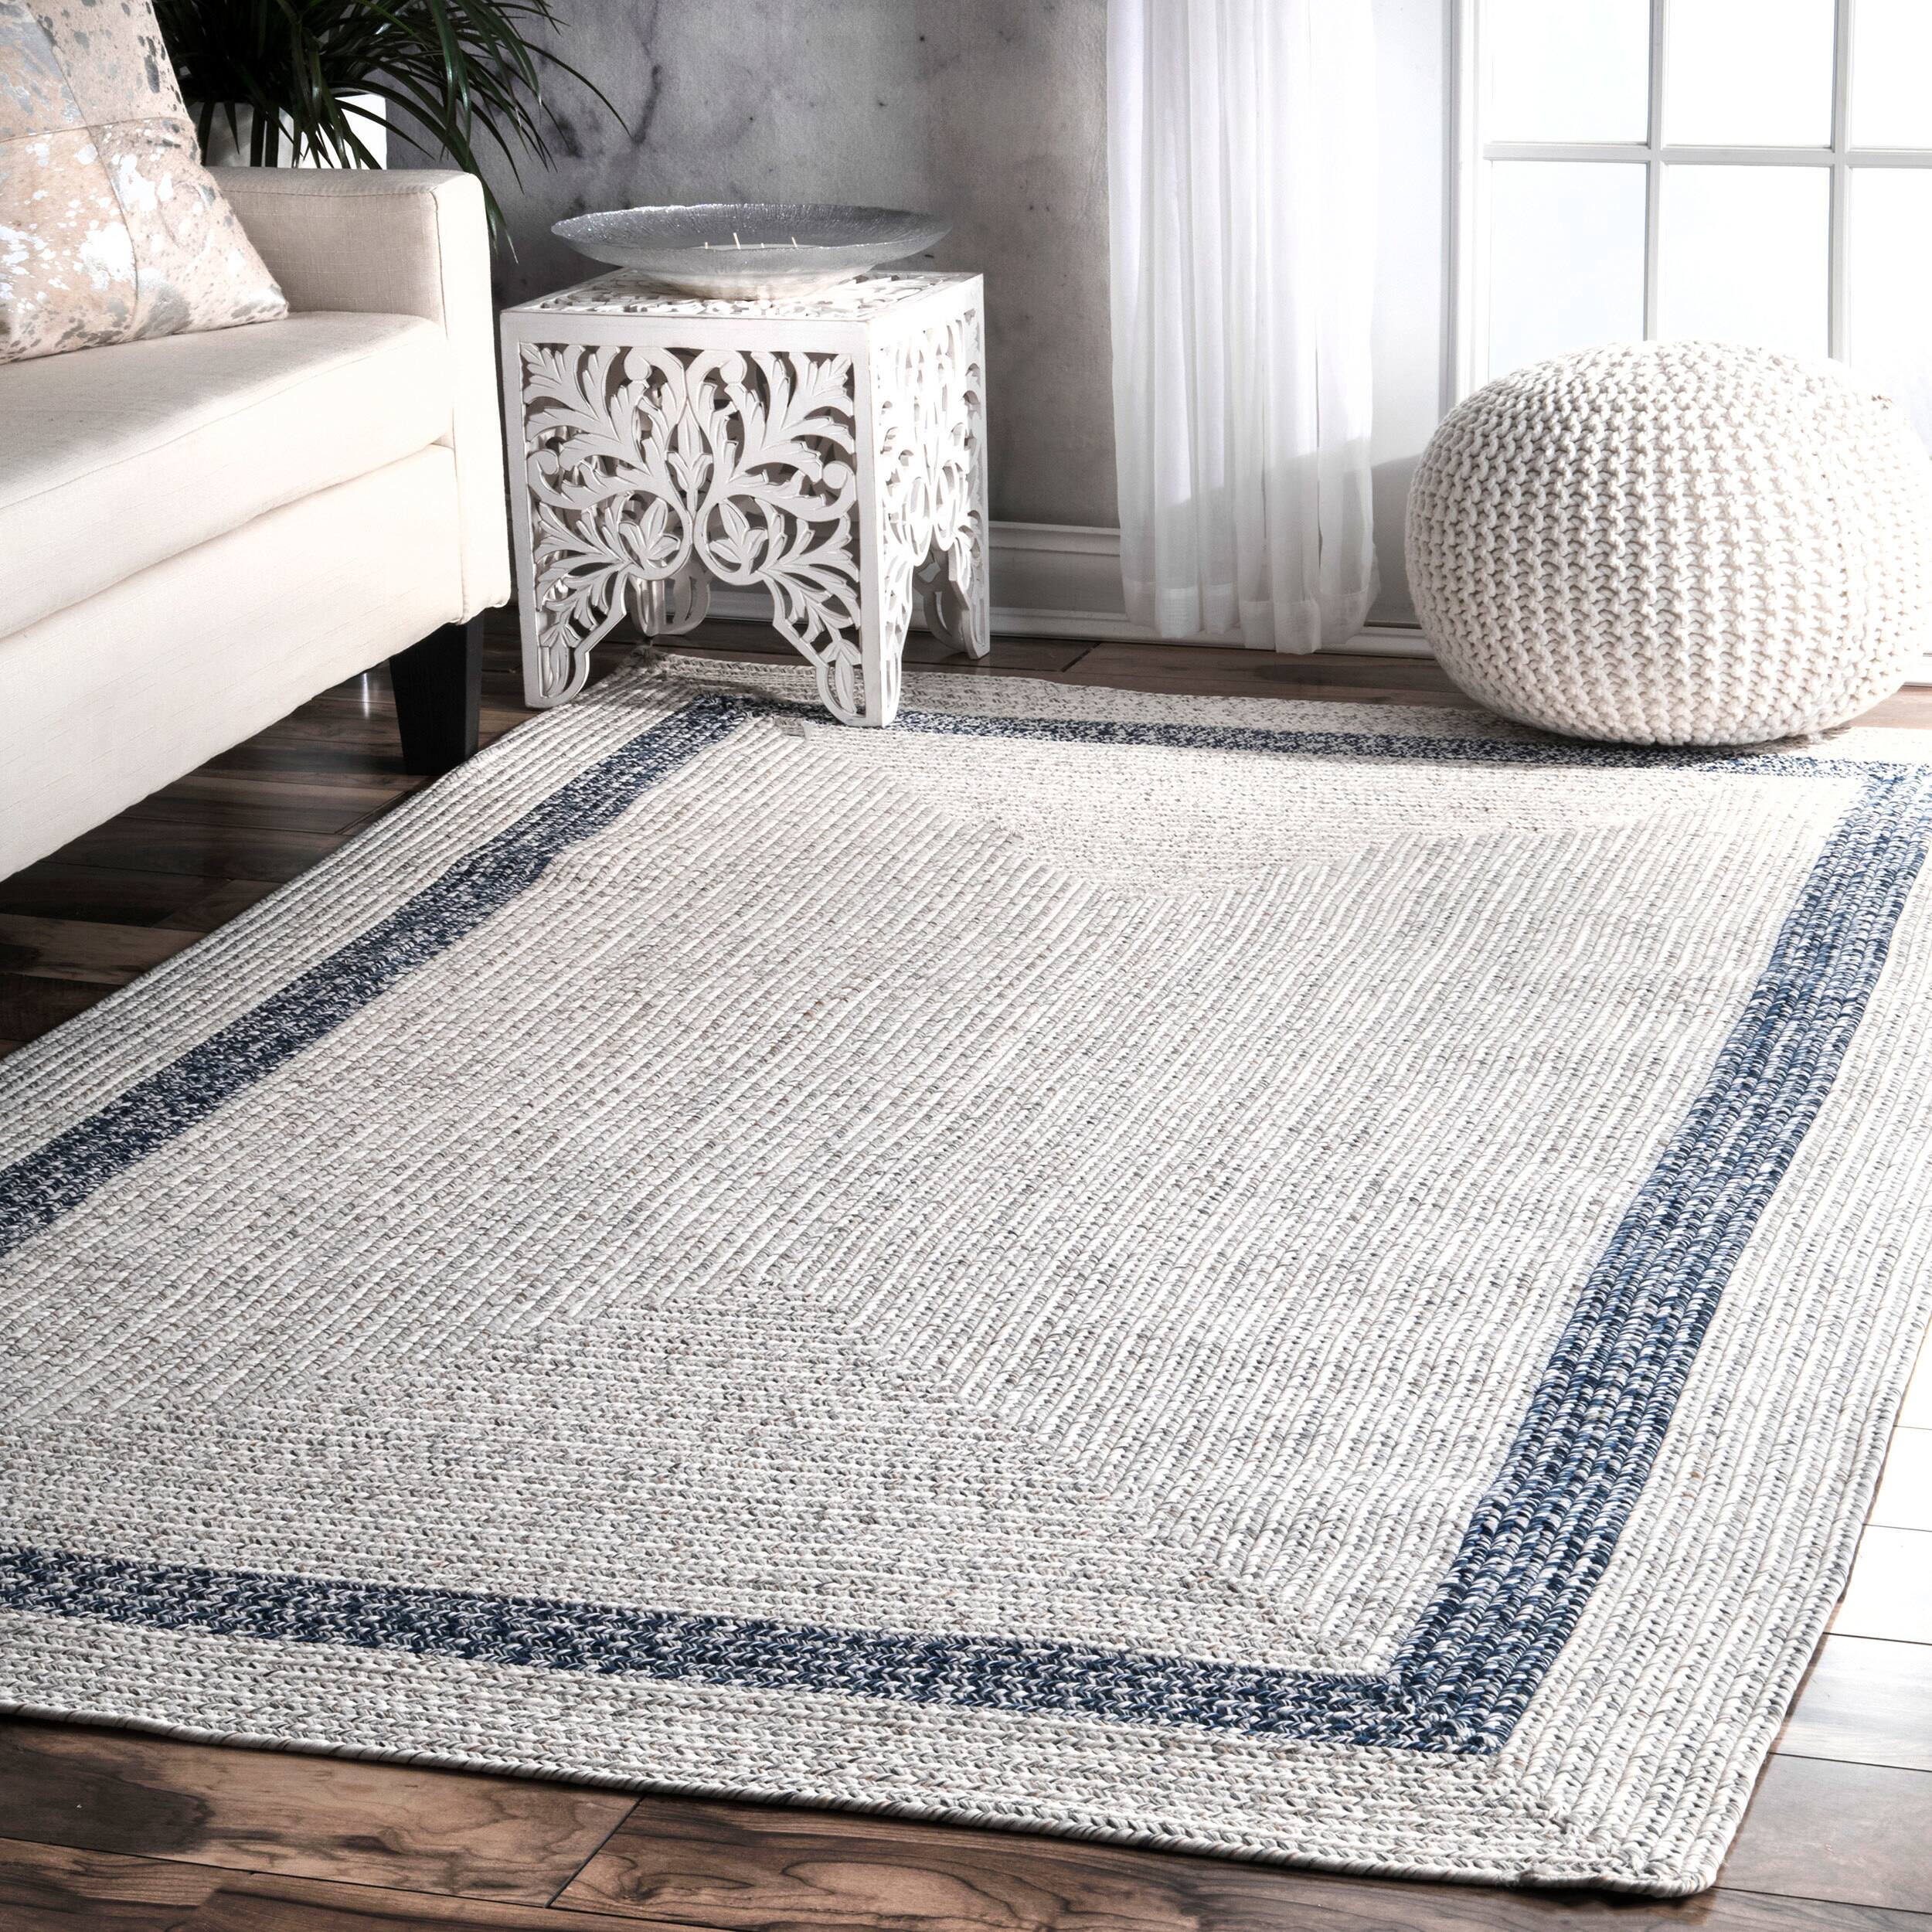 Buy 7x9 - 10x14 Rugs Online at Overstock.com | Our Best Area Rugs Deals